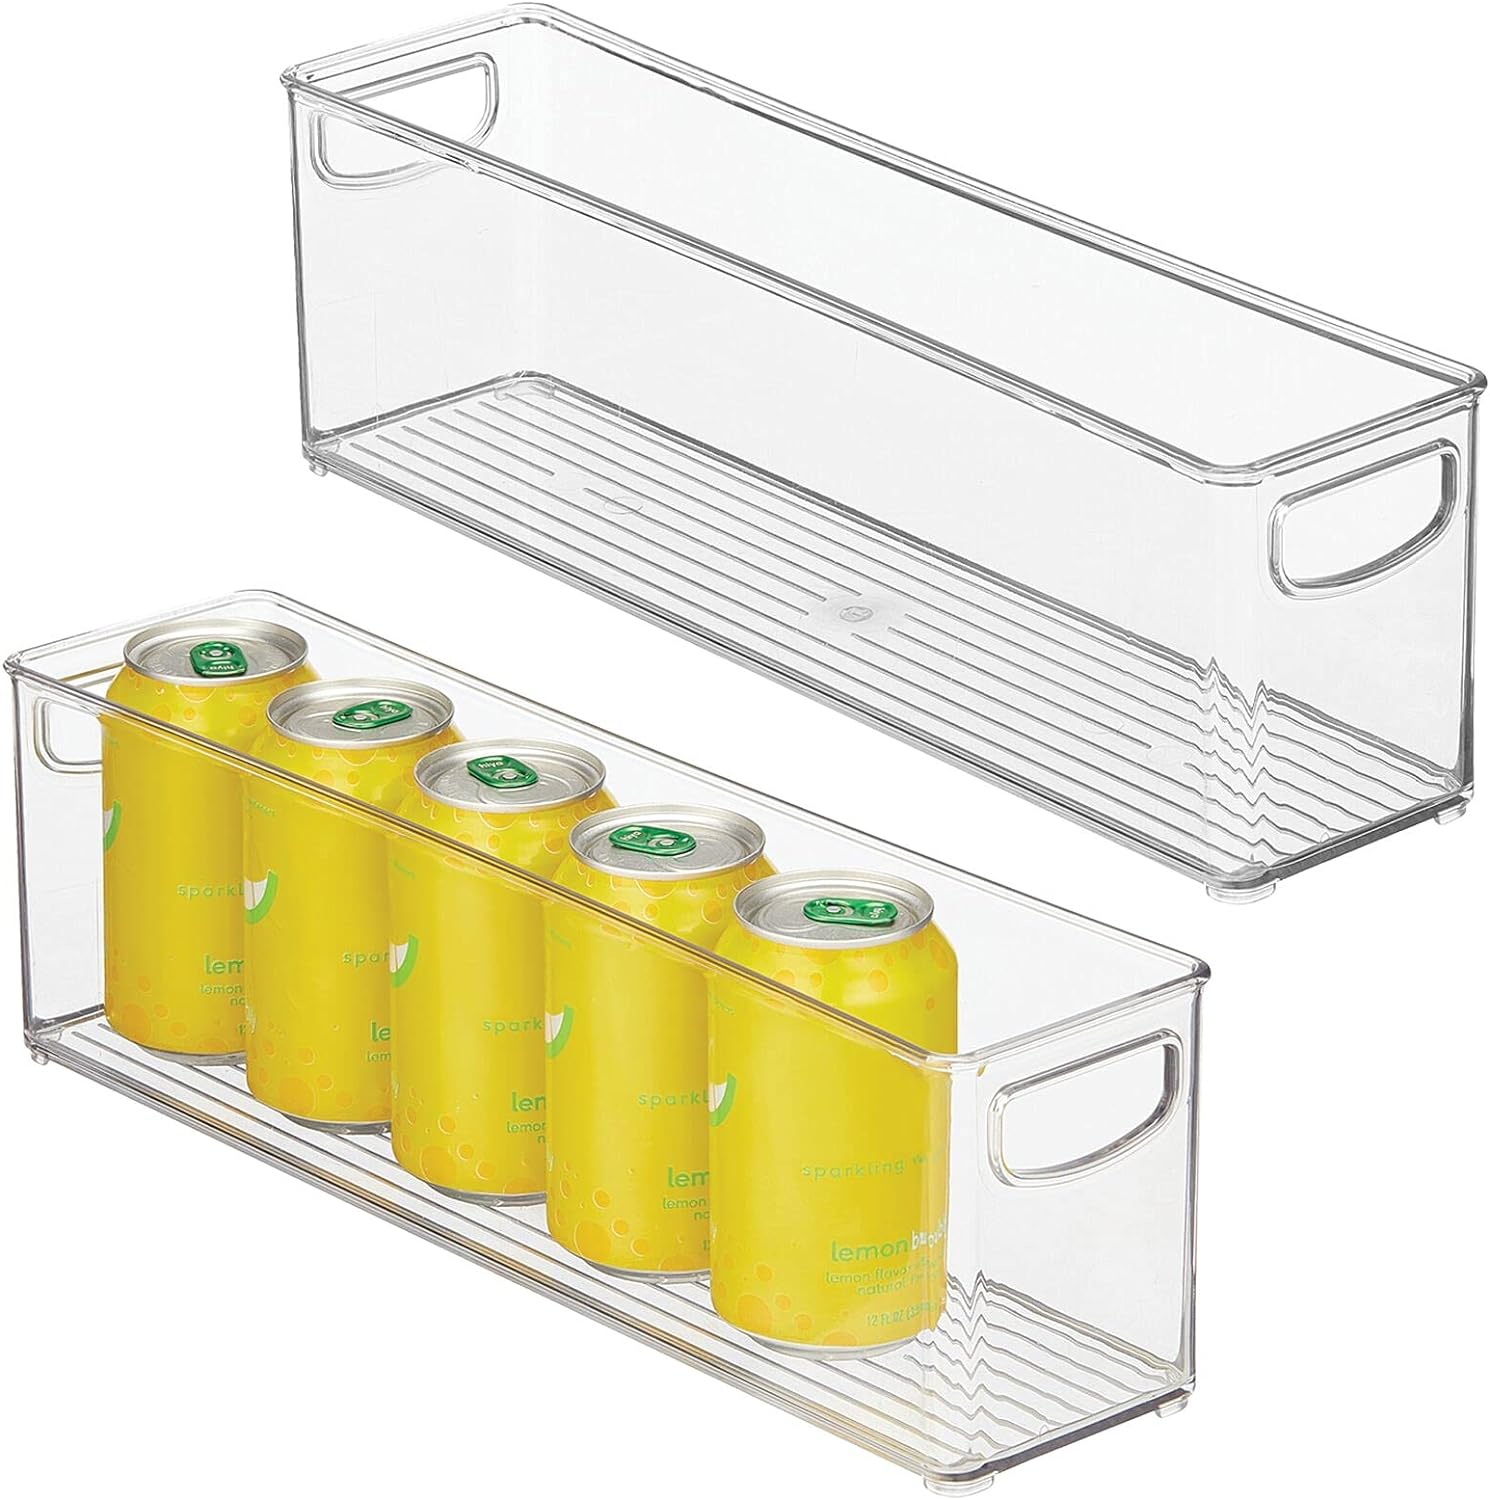 mDesign Plastic Kitchen Organizer - Storage Holder Bin with Handles for Pantry, Cupboard, Cabinet, Fridge/Freezer, Shelves, and Counter - Holds Canned Food, Snacks - Ligne Collection - 2 Pack - Clear